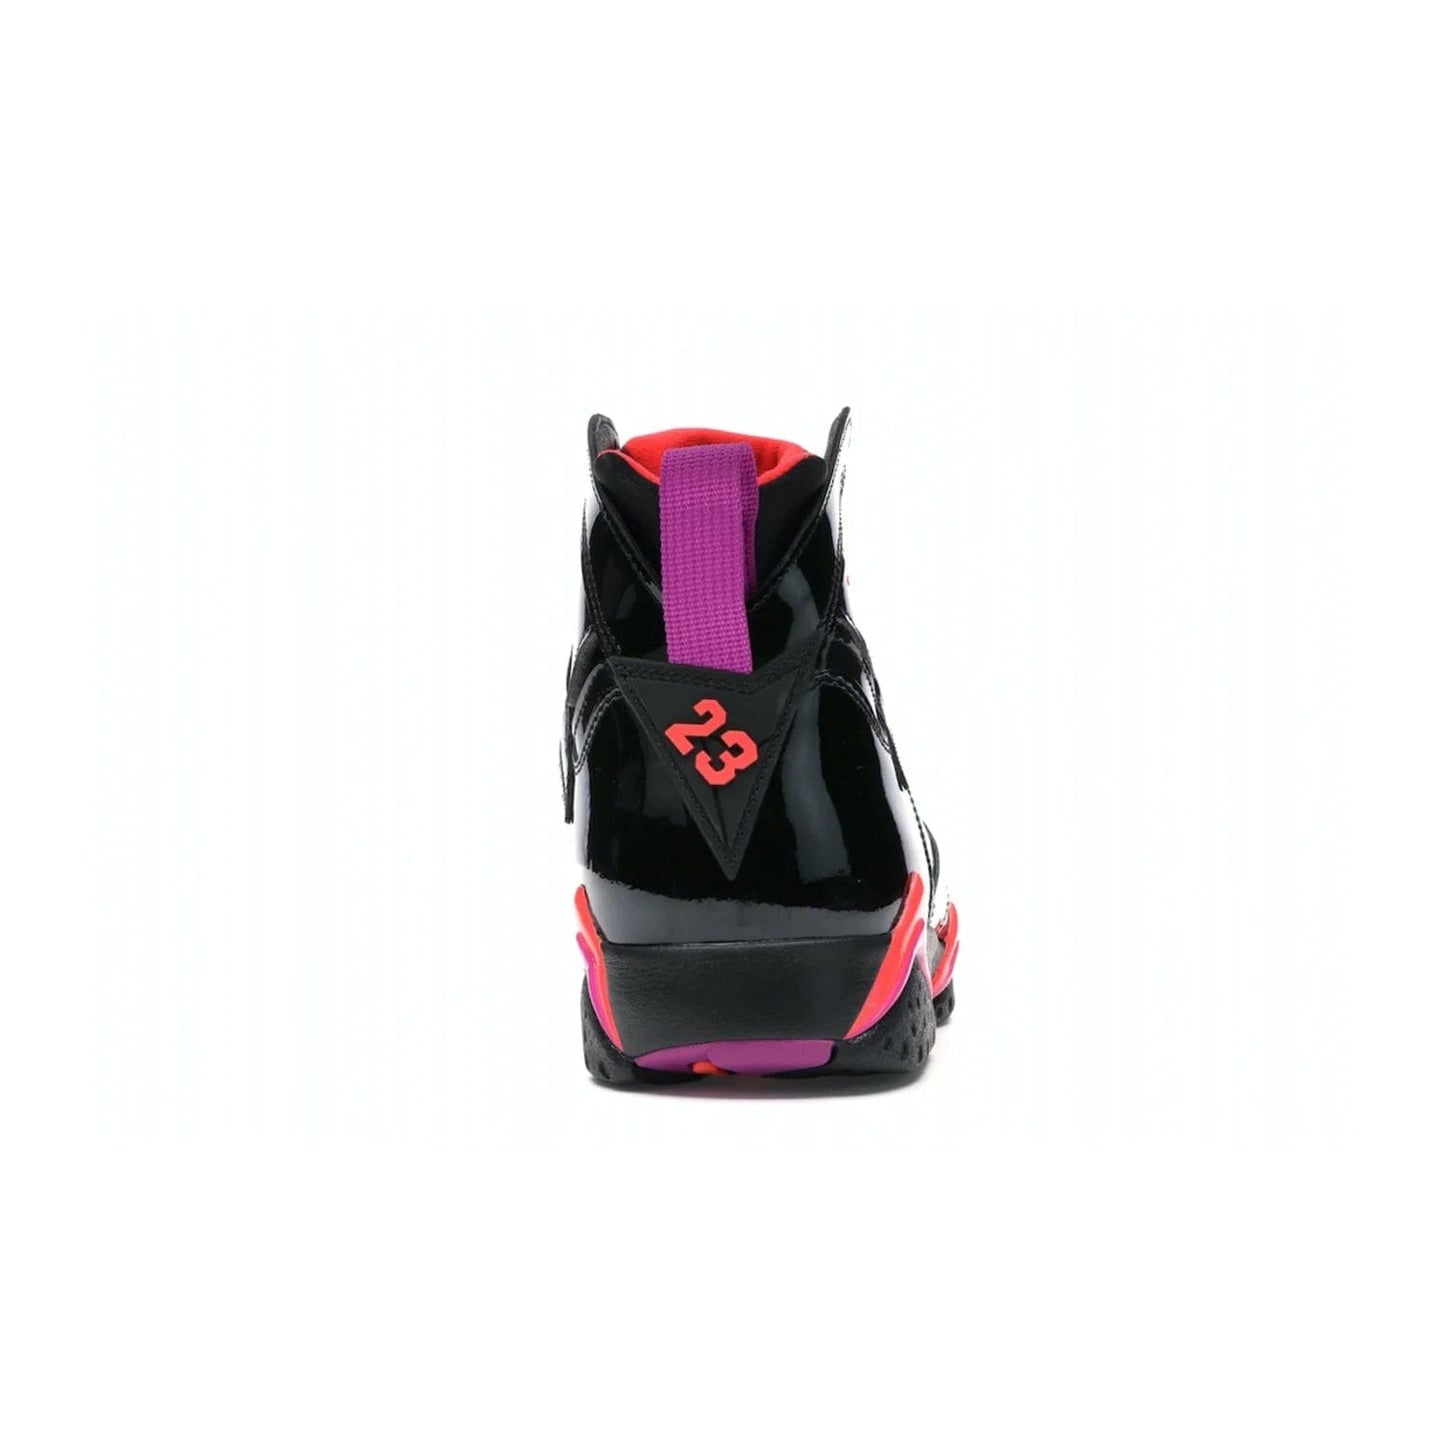 Jordan 7 Retro Black Patent (Women's) - Image 28 - Only at www.BallersClubKickz.com - #
Classic colorway! Shop the new Jordan 7 Retro Black Patent. Featuring a sleek combination of leather and patent leather upper, these shoes offer a bold yet luxurious look. Perfectly complete with a bright red Jumpman logo. Self-lacing Smart laces and Air-Sole cushion unit provide comfort and convenience.